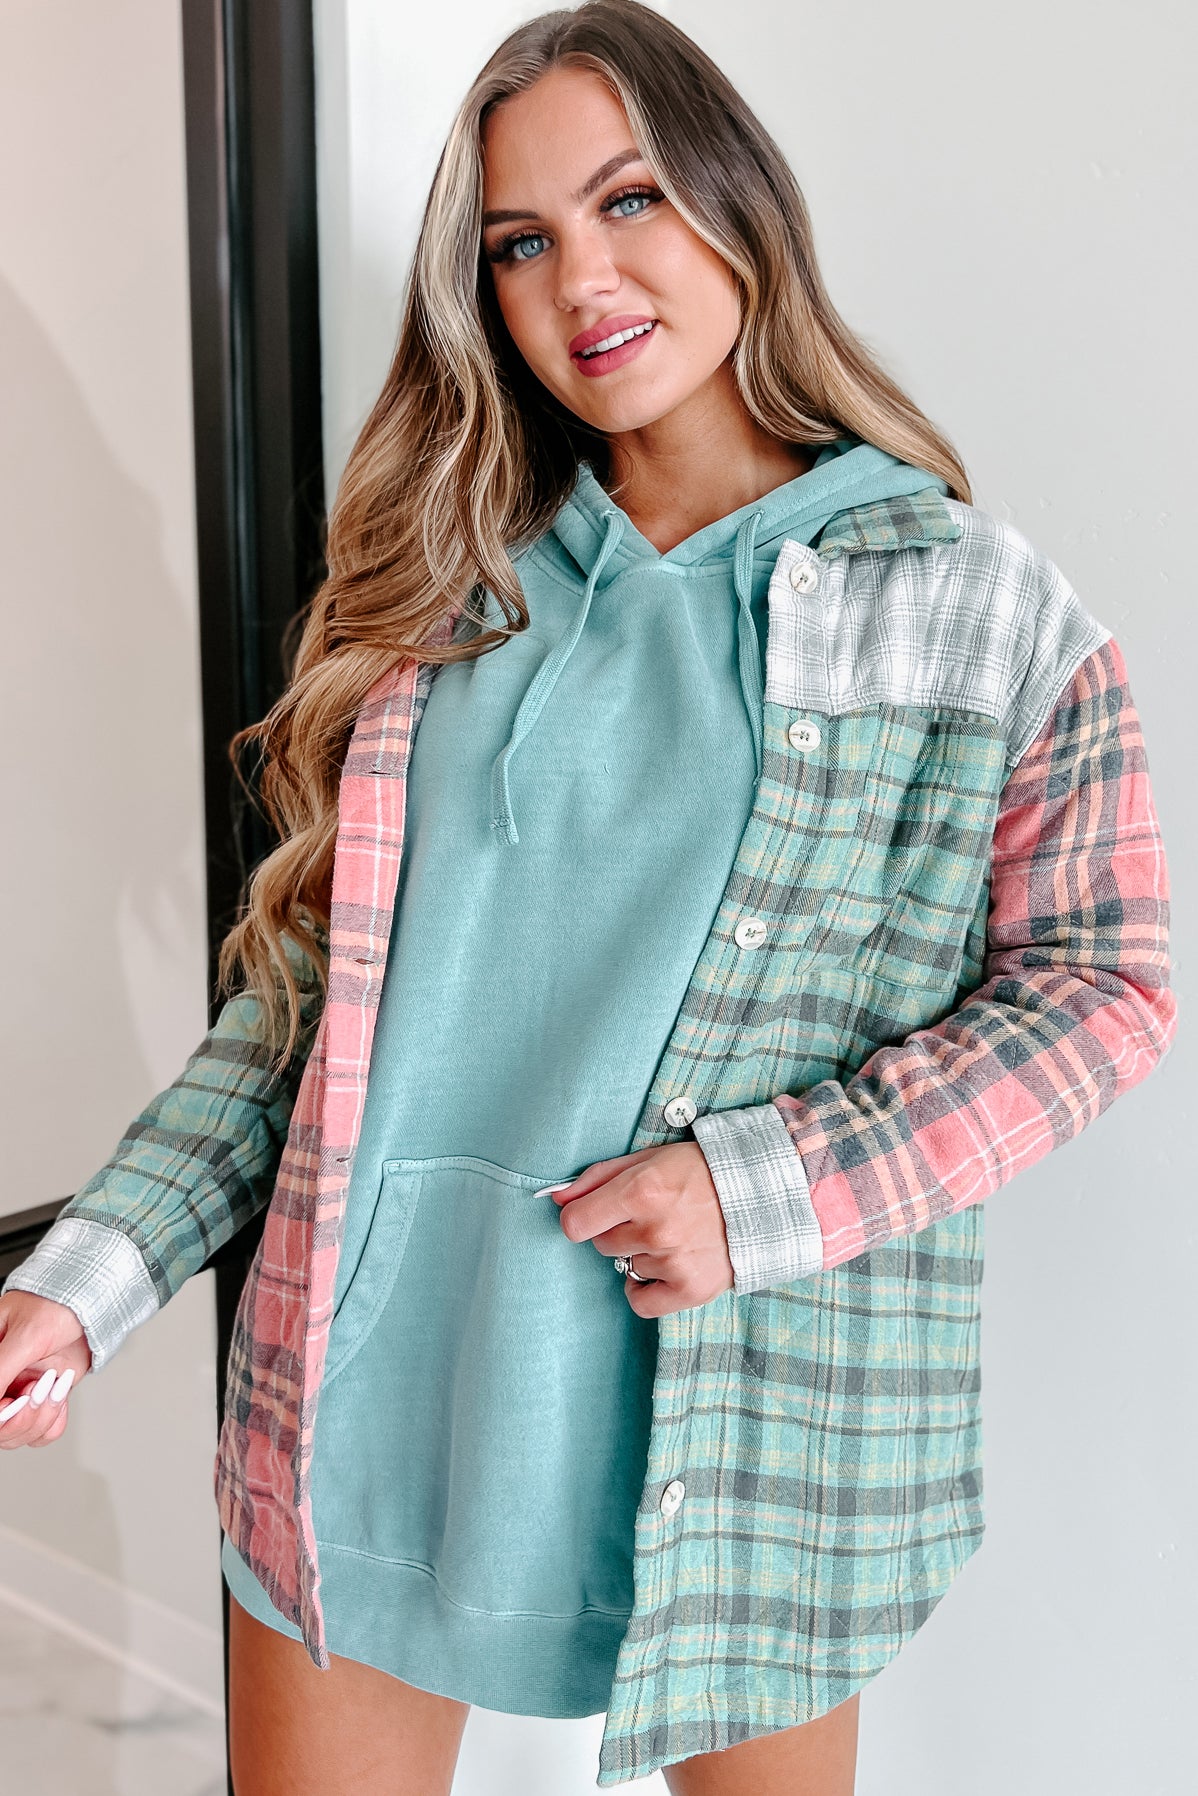 Just Up The Road Quilted Plaid Jacket (Green Multi) - NanaMacs